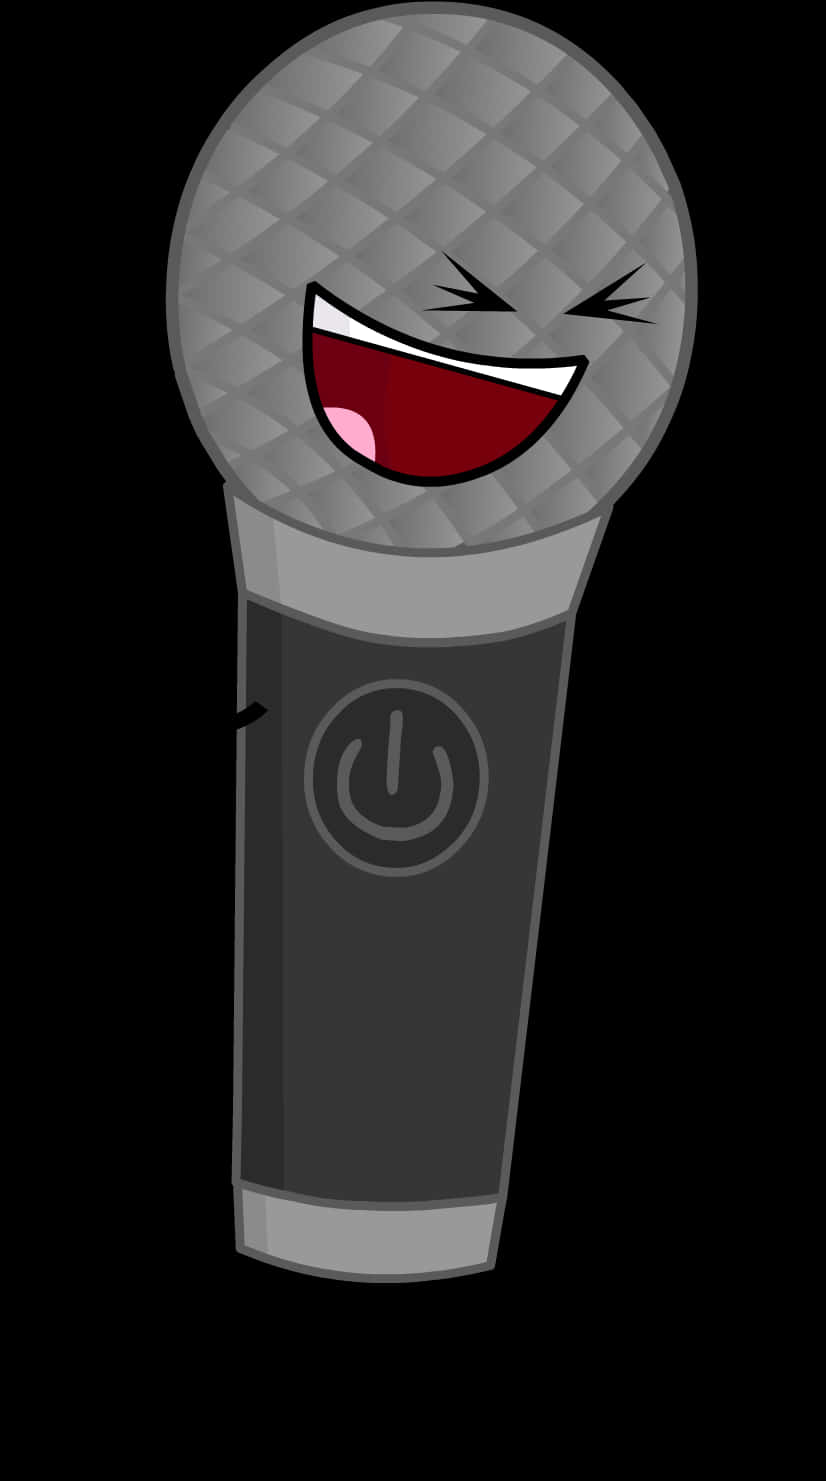 Animated Microphone Character Smiling